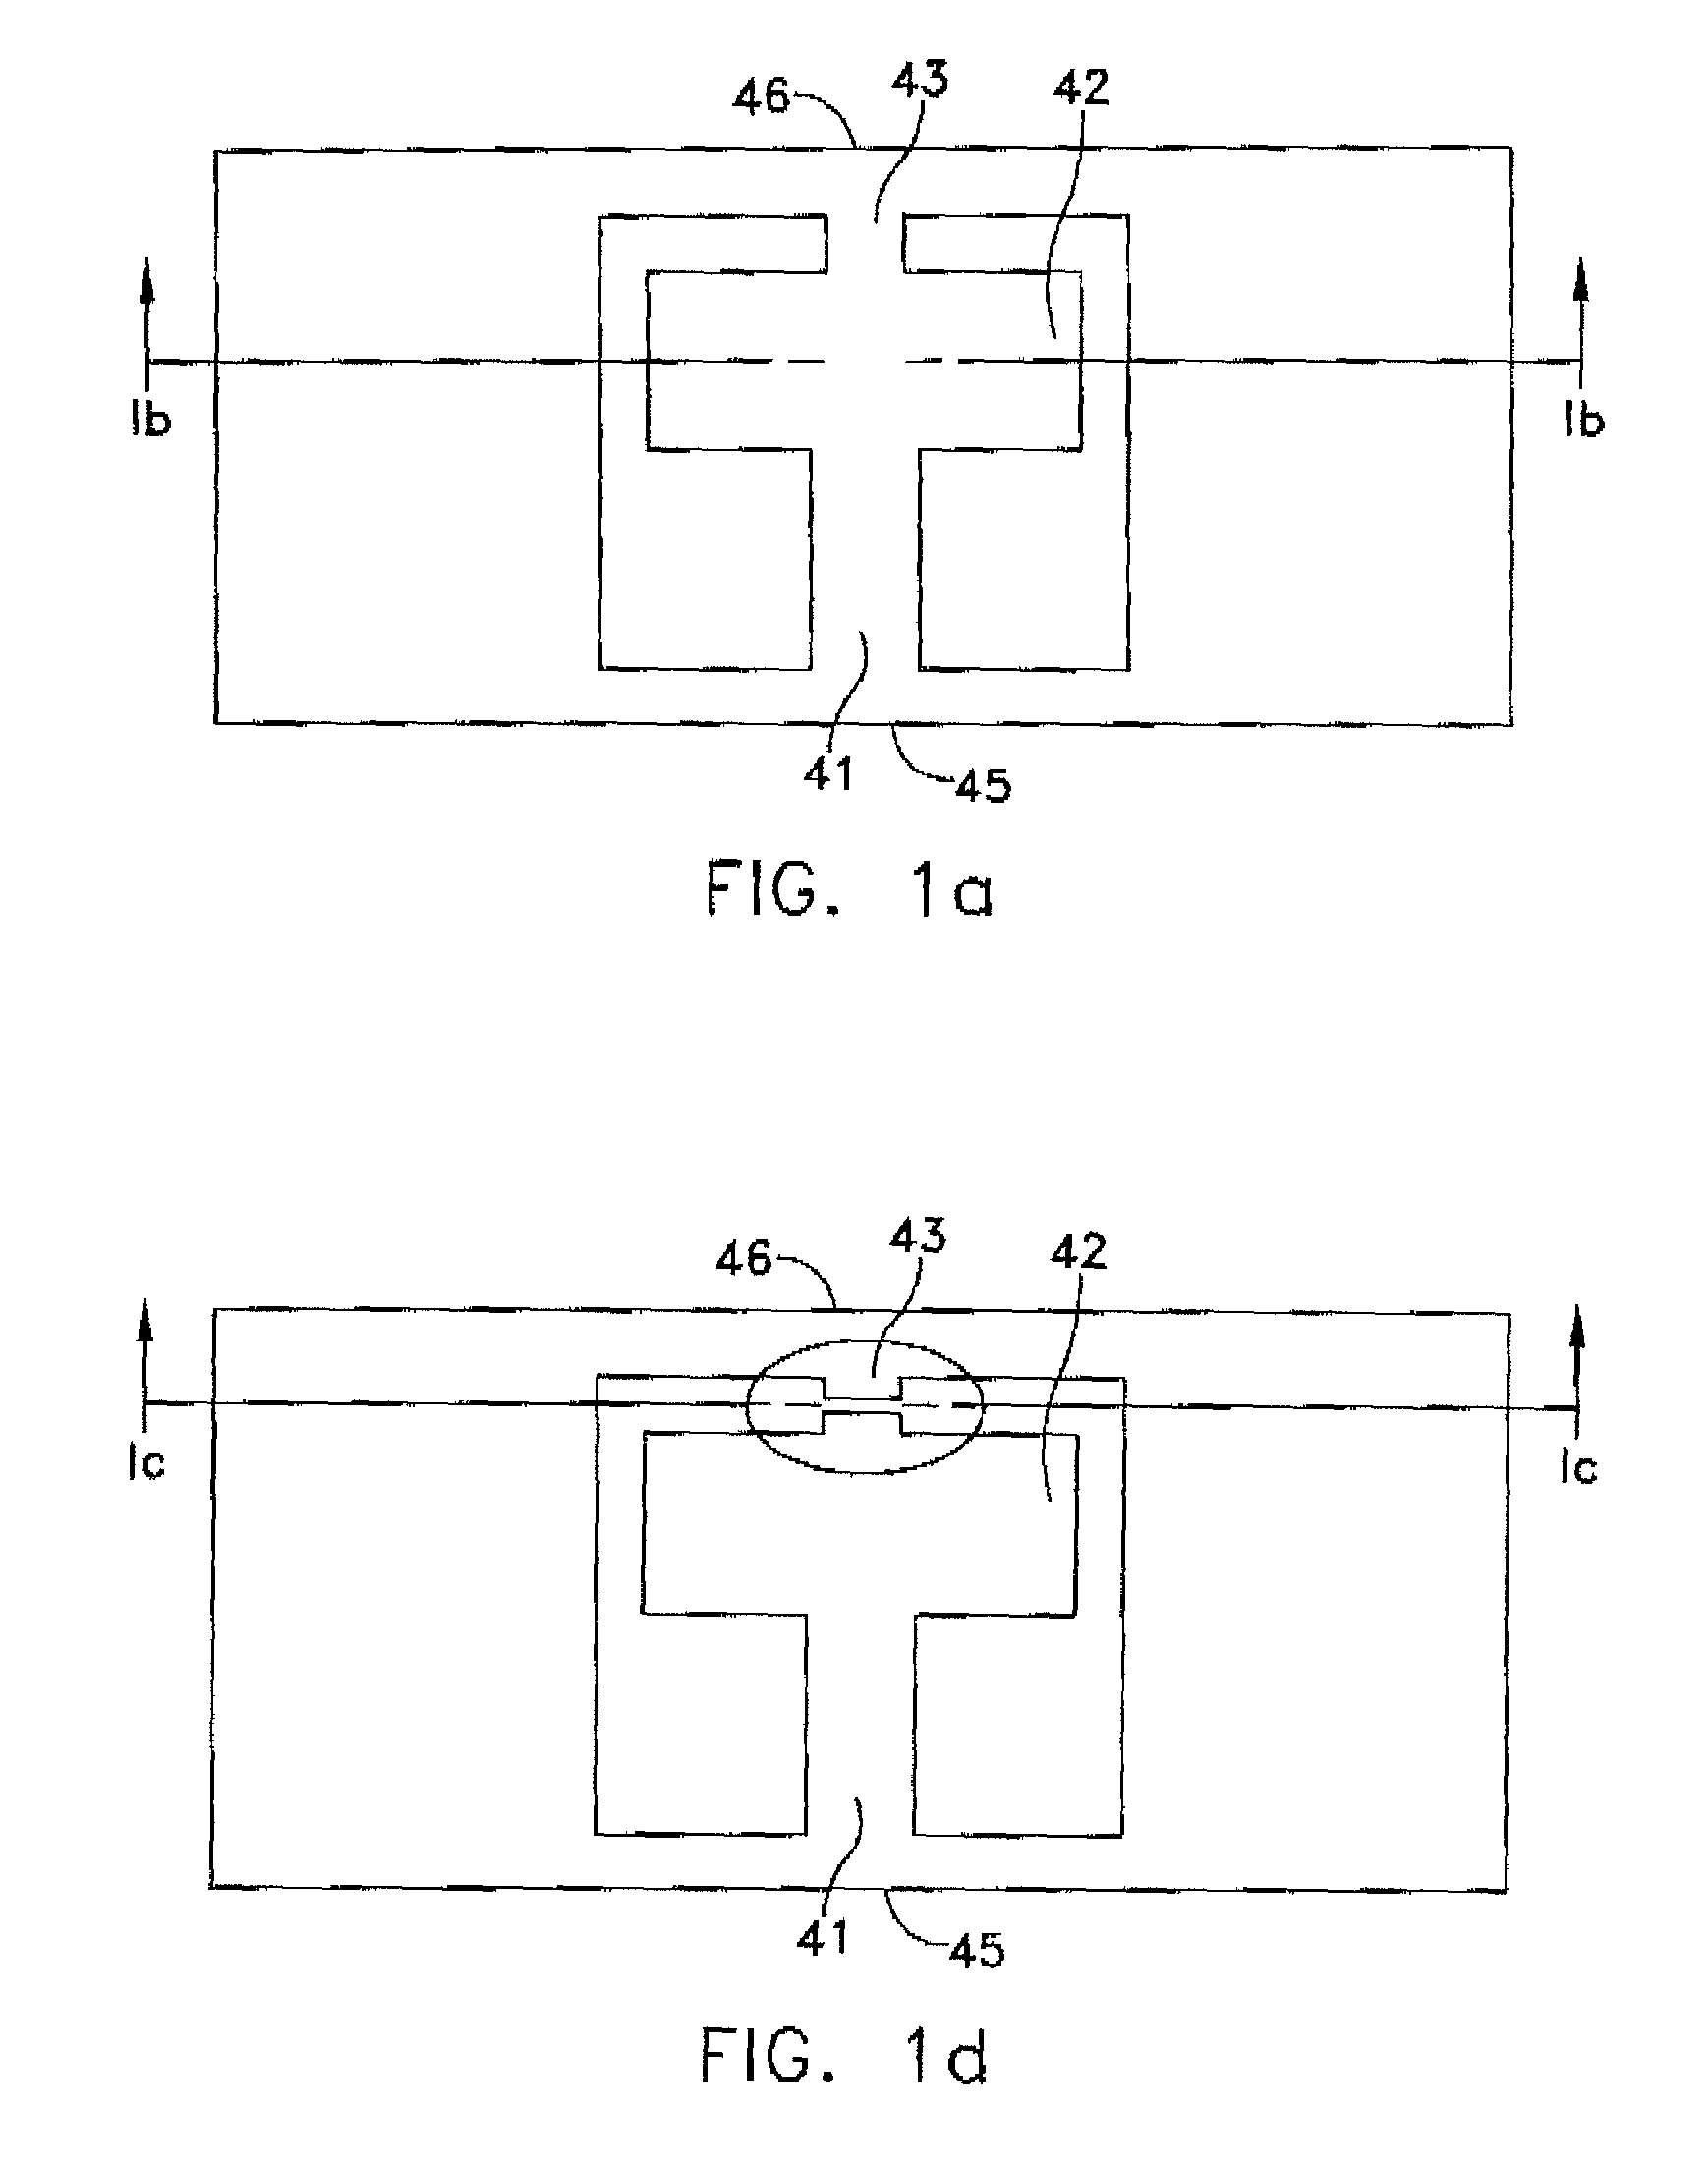 Polymide substrate bonded to other substrate